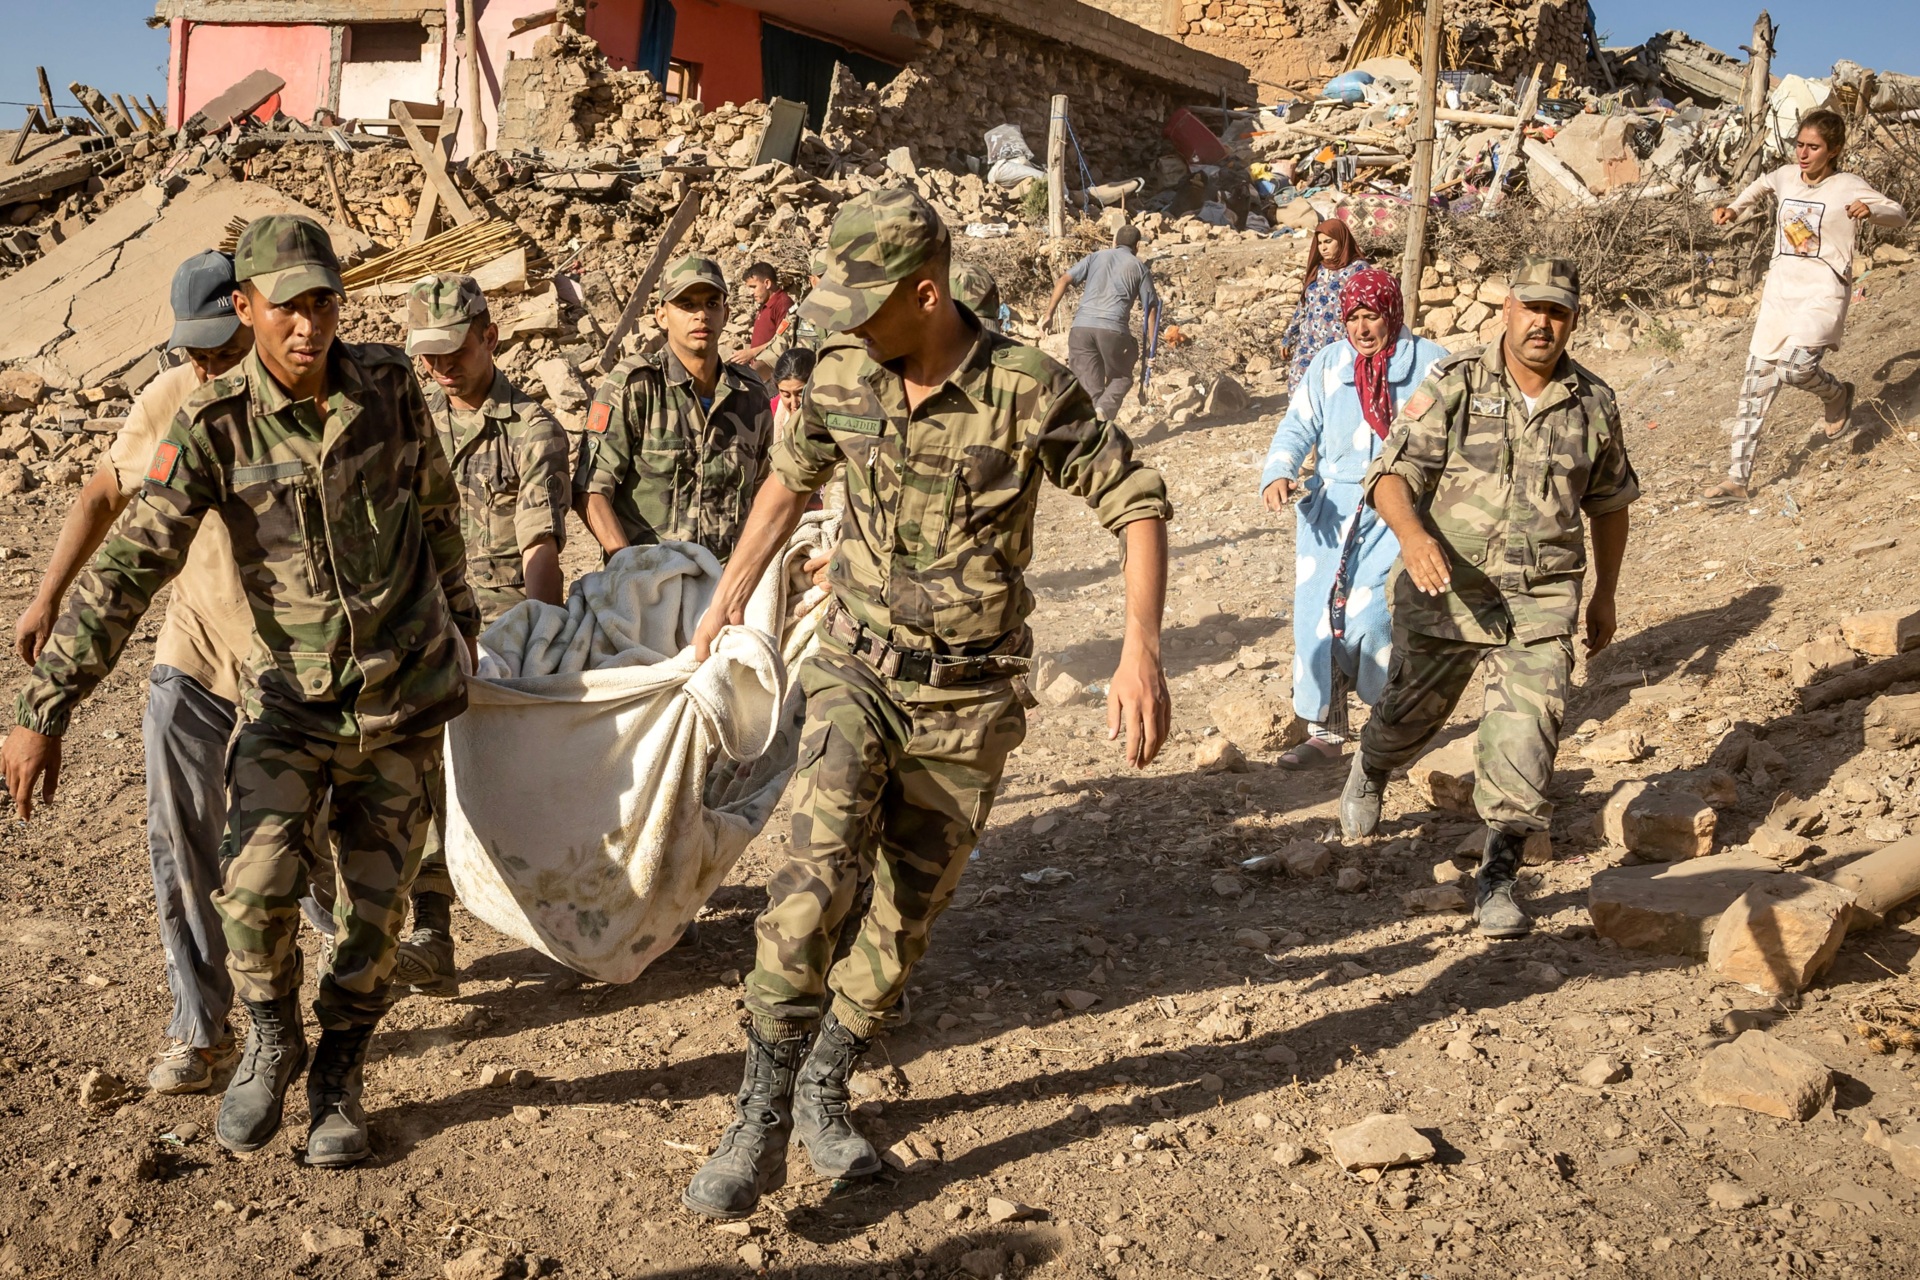 Moroccan Royal Armed Forces evacuate a body from a house destroyed in an earthquake in the mountain village of Tafeghaghte, southwest of the city of Marrakesh, on September 9, 2023. Morocco's deadliest earthquake in decades has killed more than 1,300 people, authorities said on September 9, as troops and emergency services scrambled to reach remote mountain villages where casualties are still feared trapped. (Photo by FADEL SENNA / AFP) (Photo by FADEL SENNA/AFP via Getty Images)